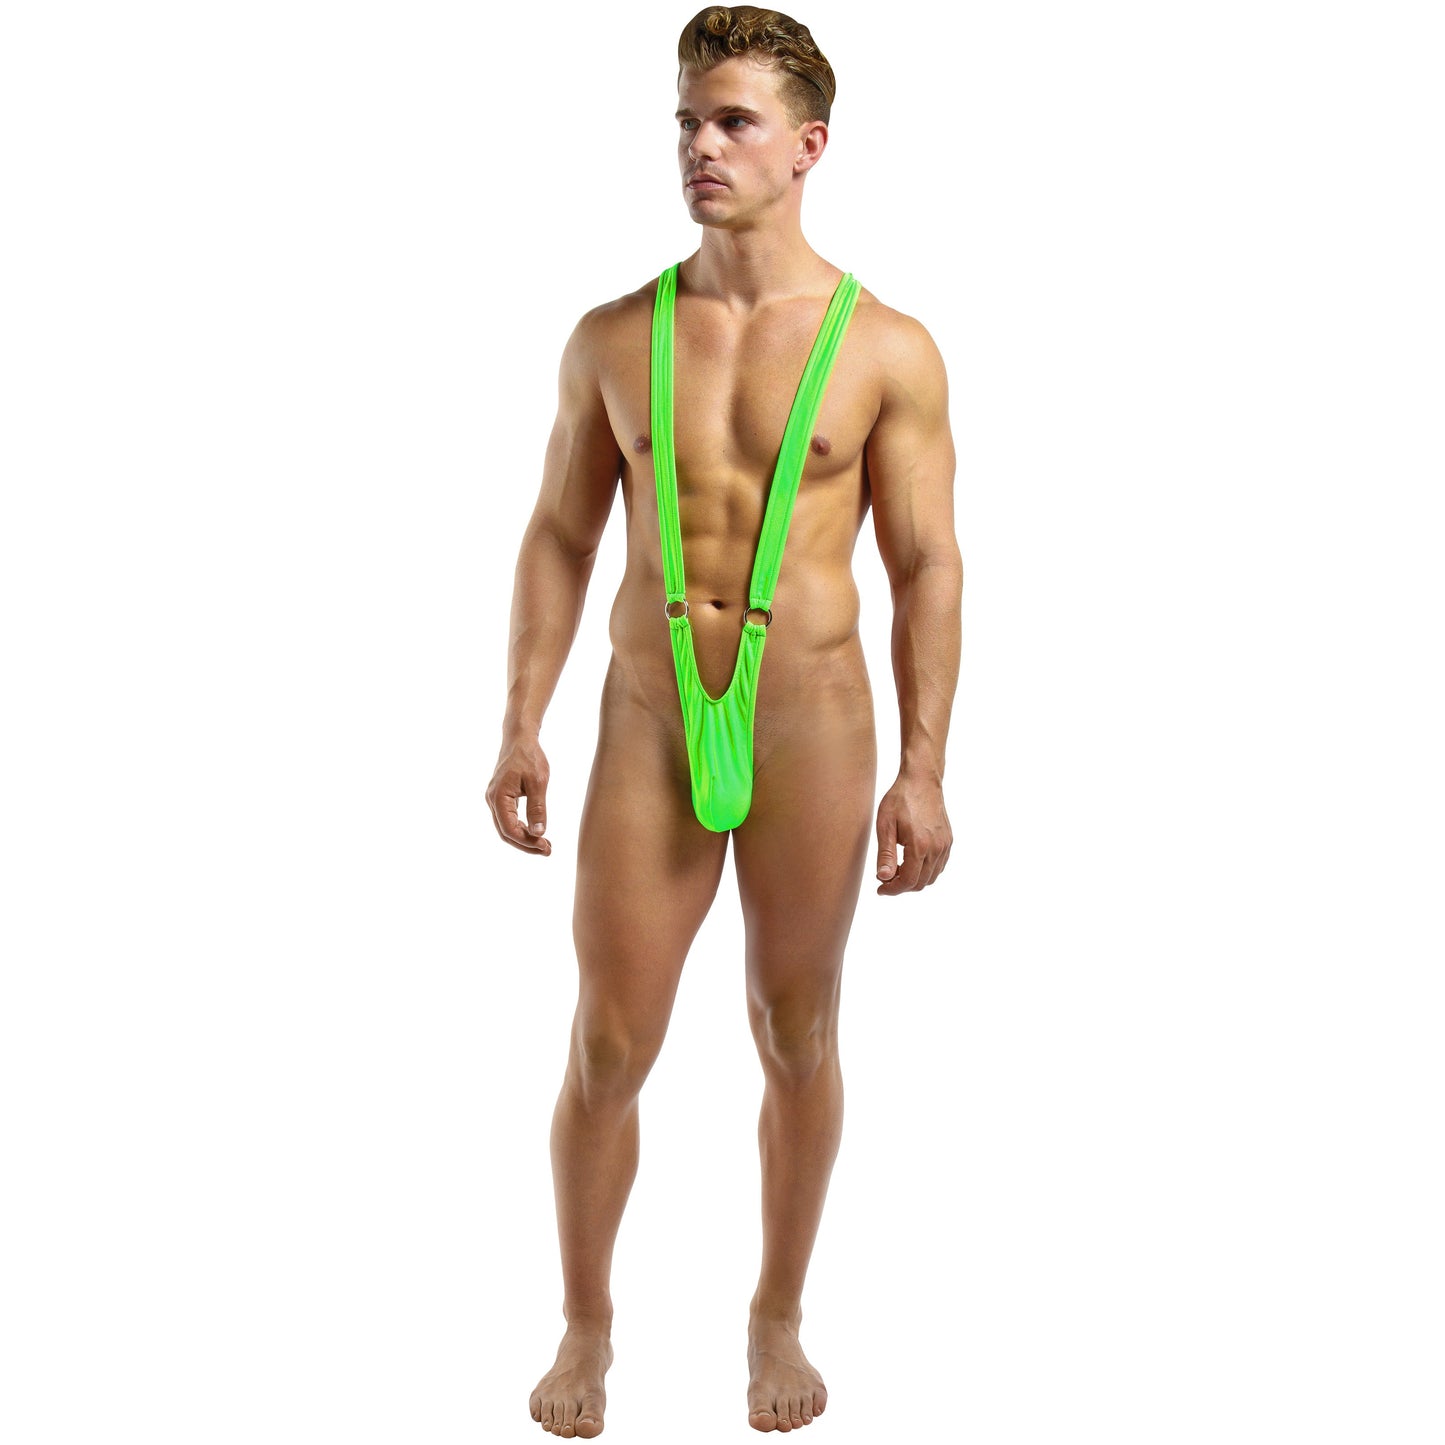 Male Power Sling Front Rings - Green